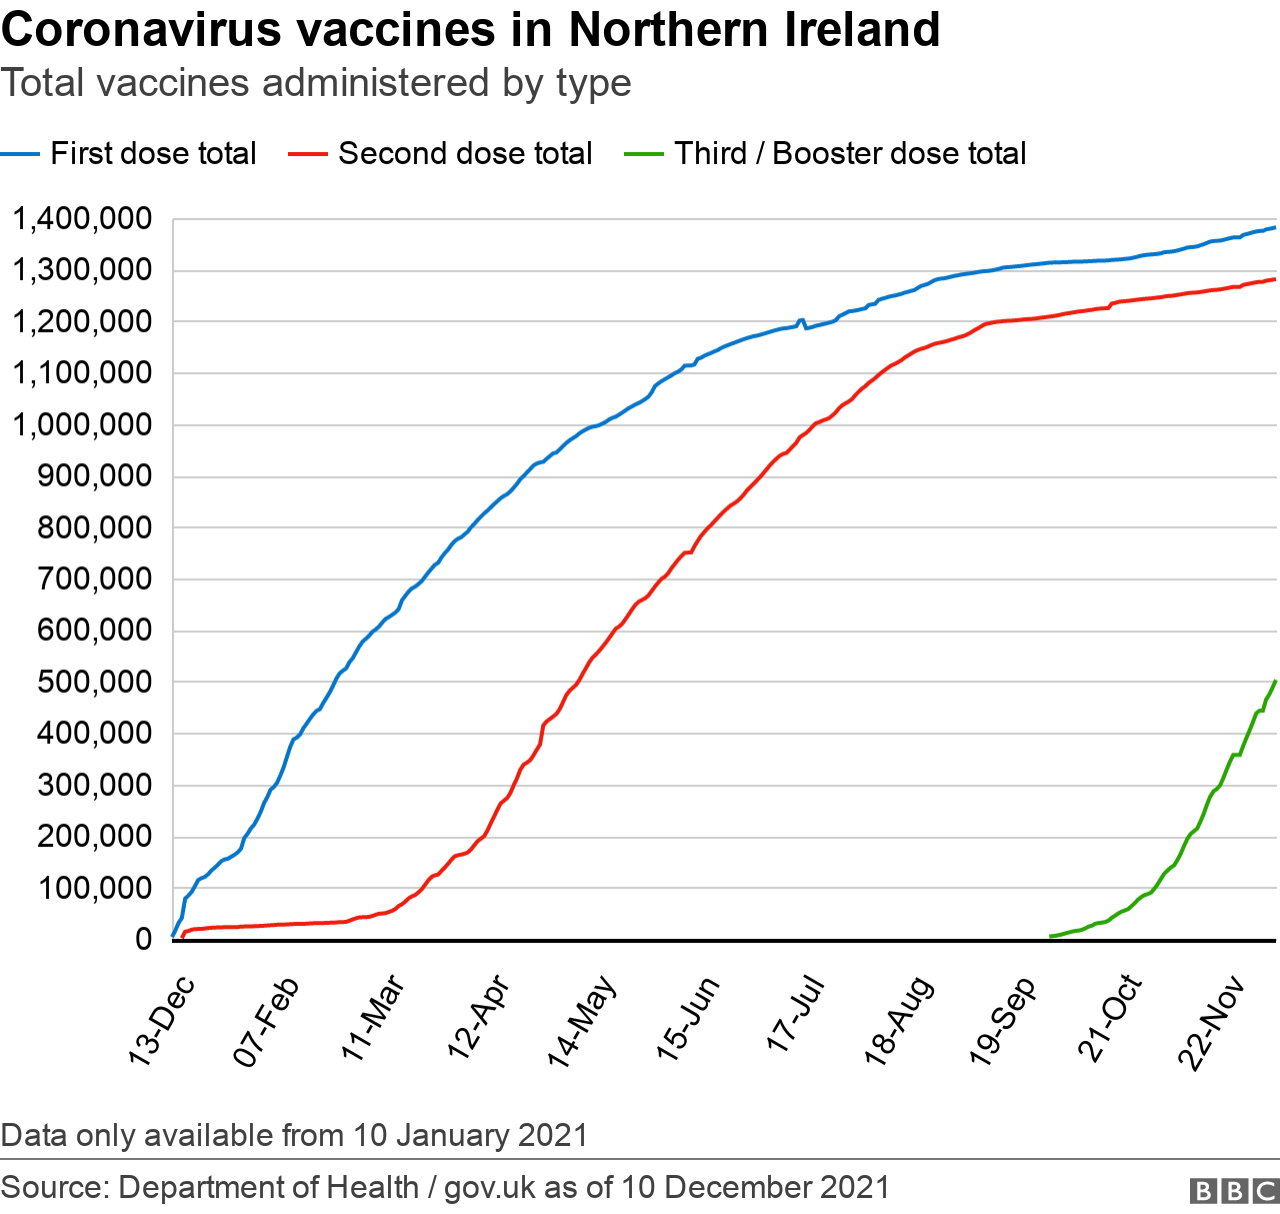 A graph showing the total number of first, second and third/booster doses of Covid-19 vaccines administered in Northern Ireland